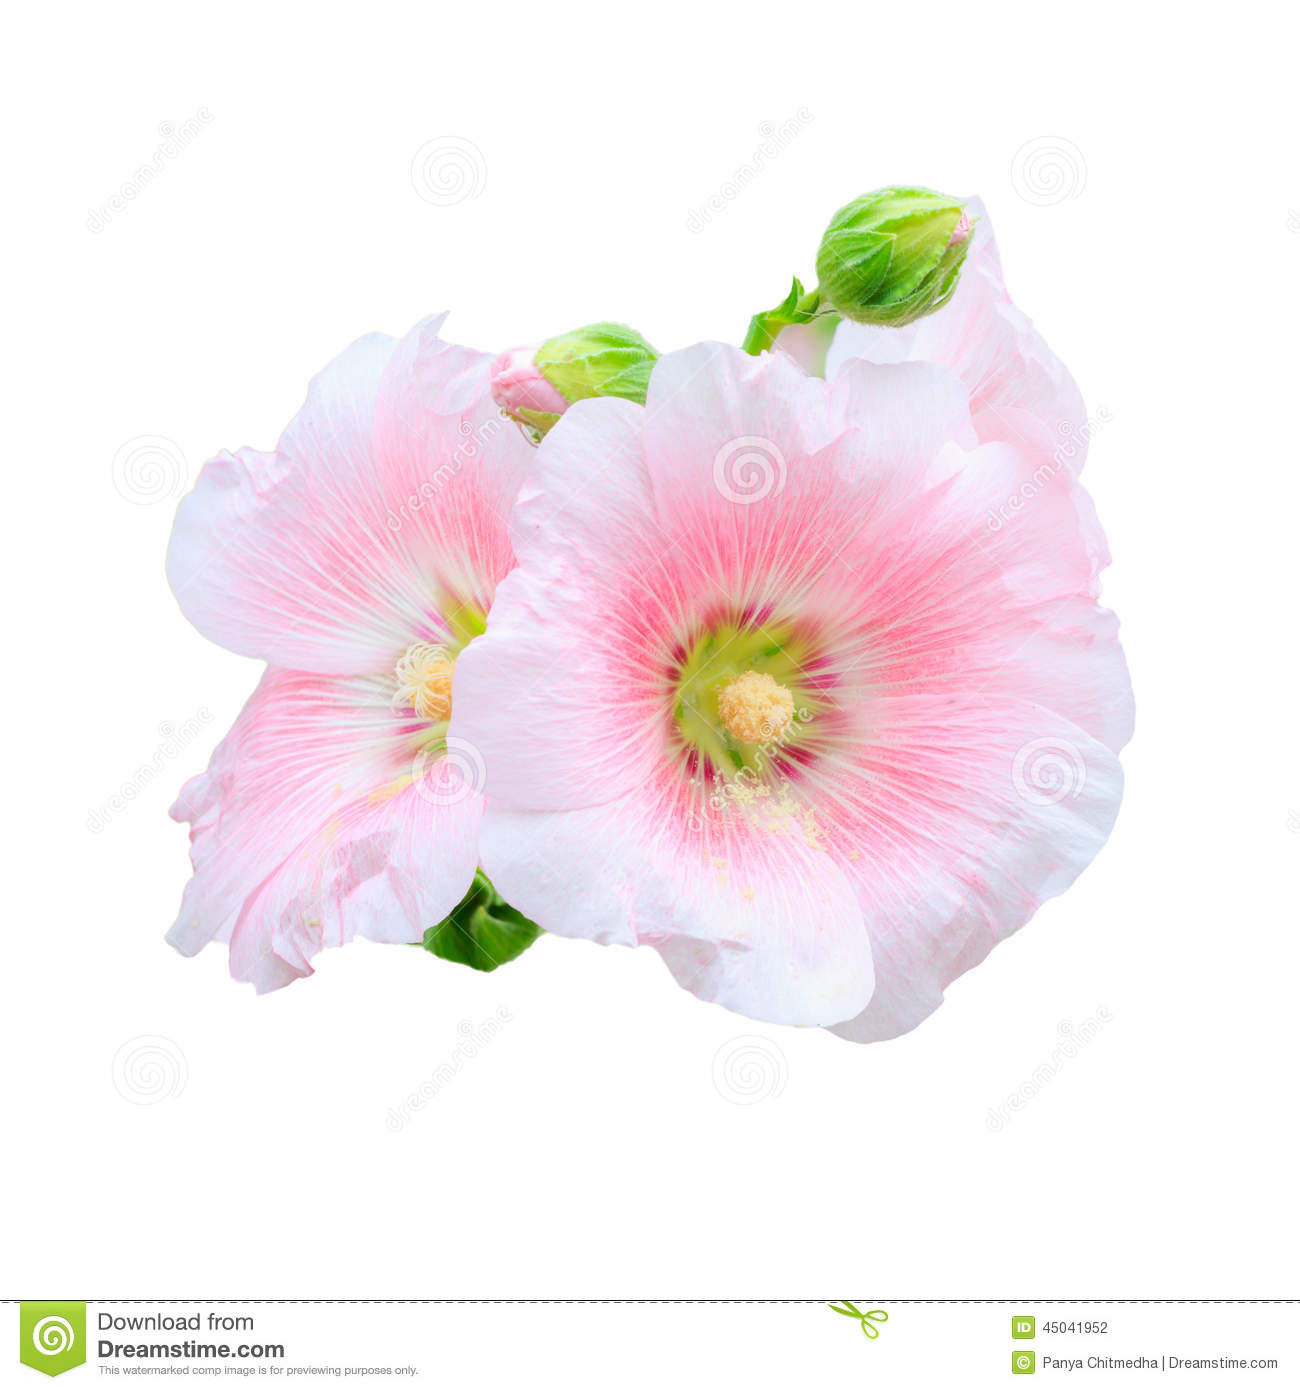 clipart rose of sharon - photo #1